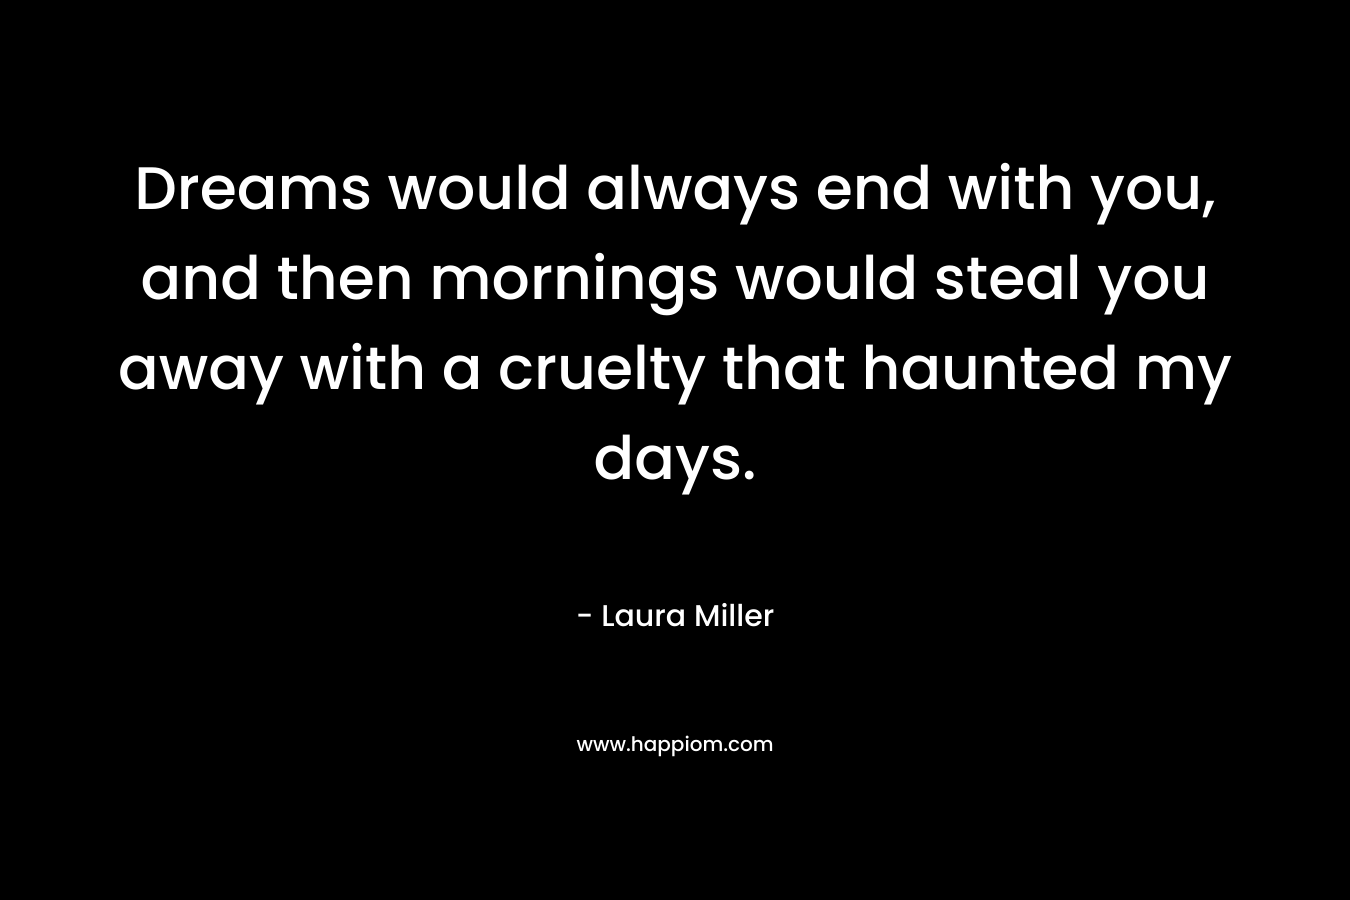 Dreams would always end with you, and then mornings would steal you away with a cruelty that haunted my days.